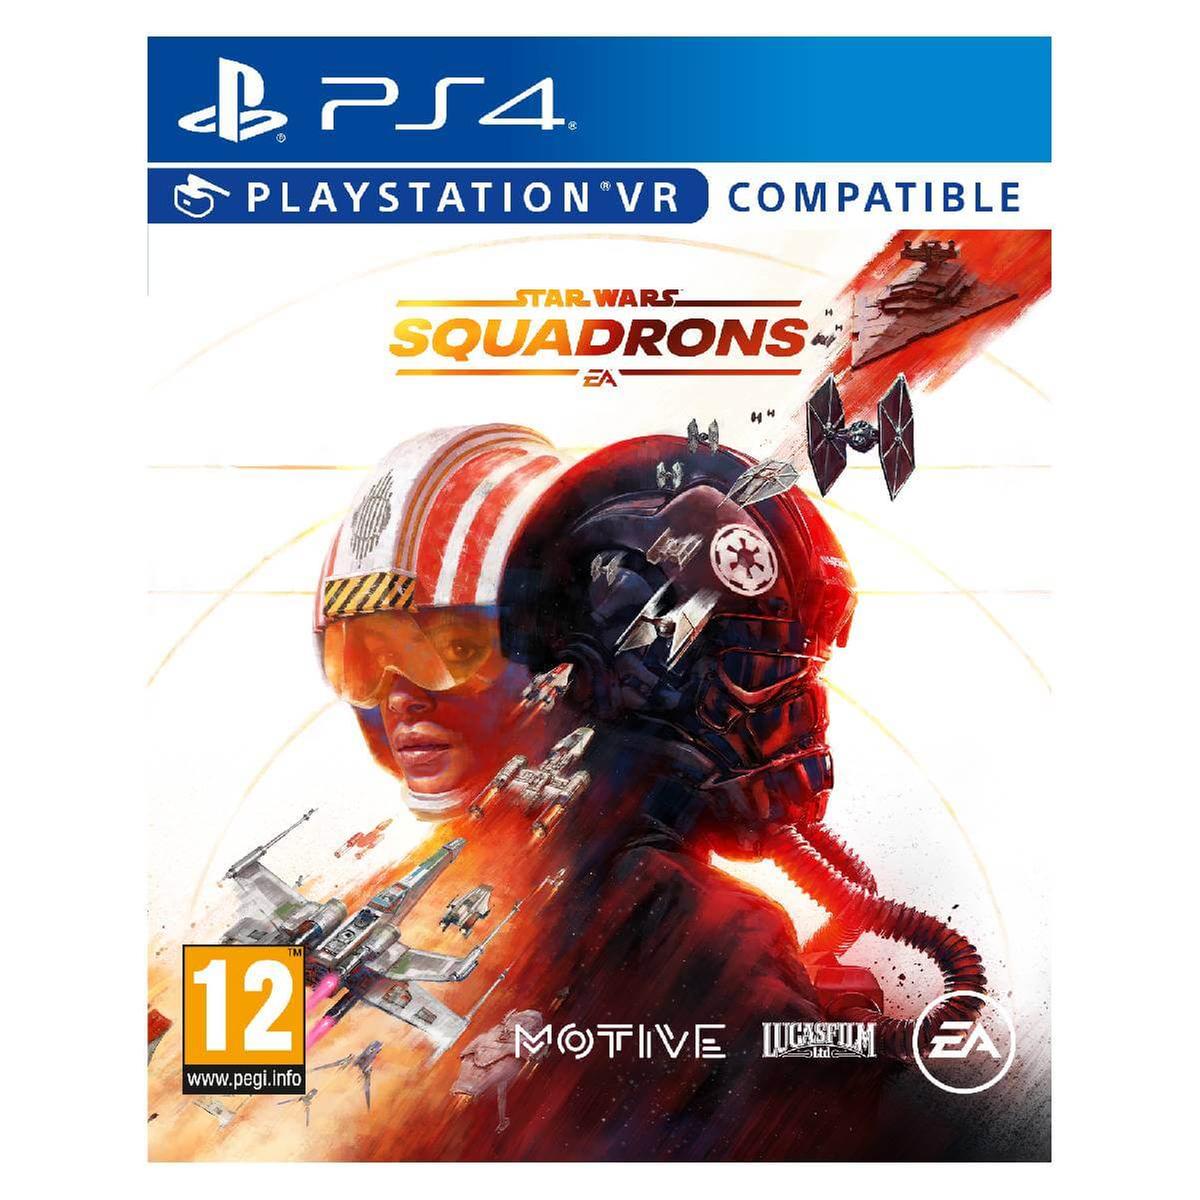 PS4 - Star Wars: Squadrons | Software | Toys"R"Us España